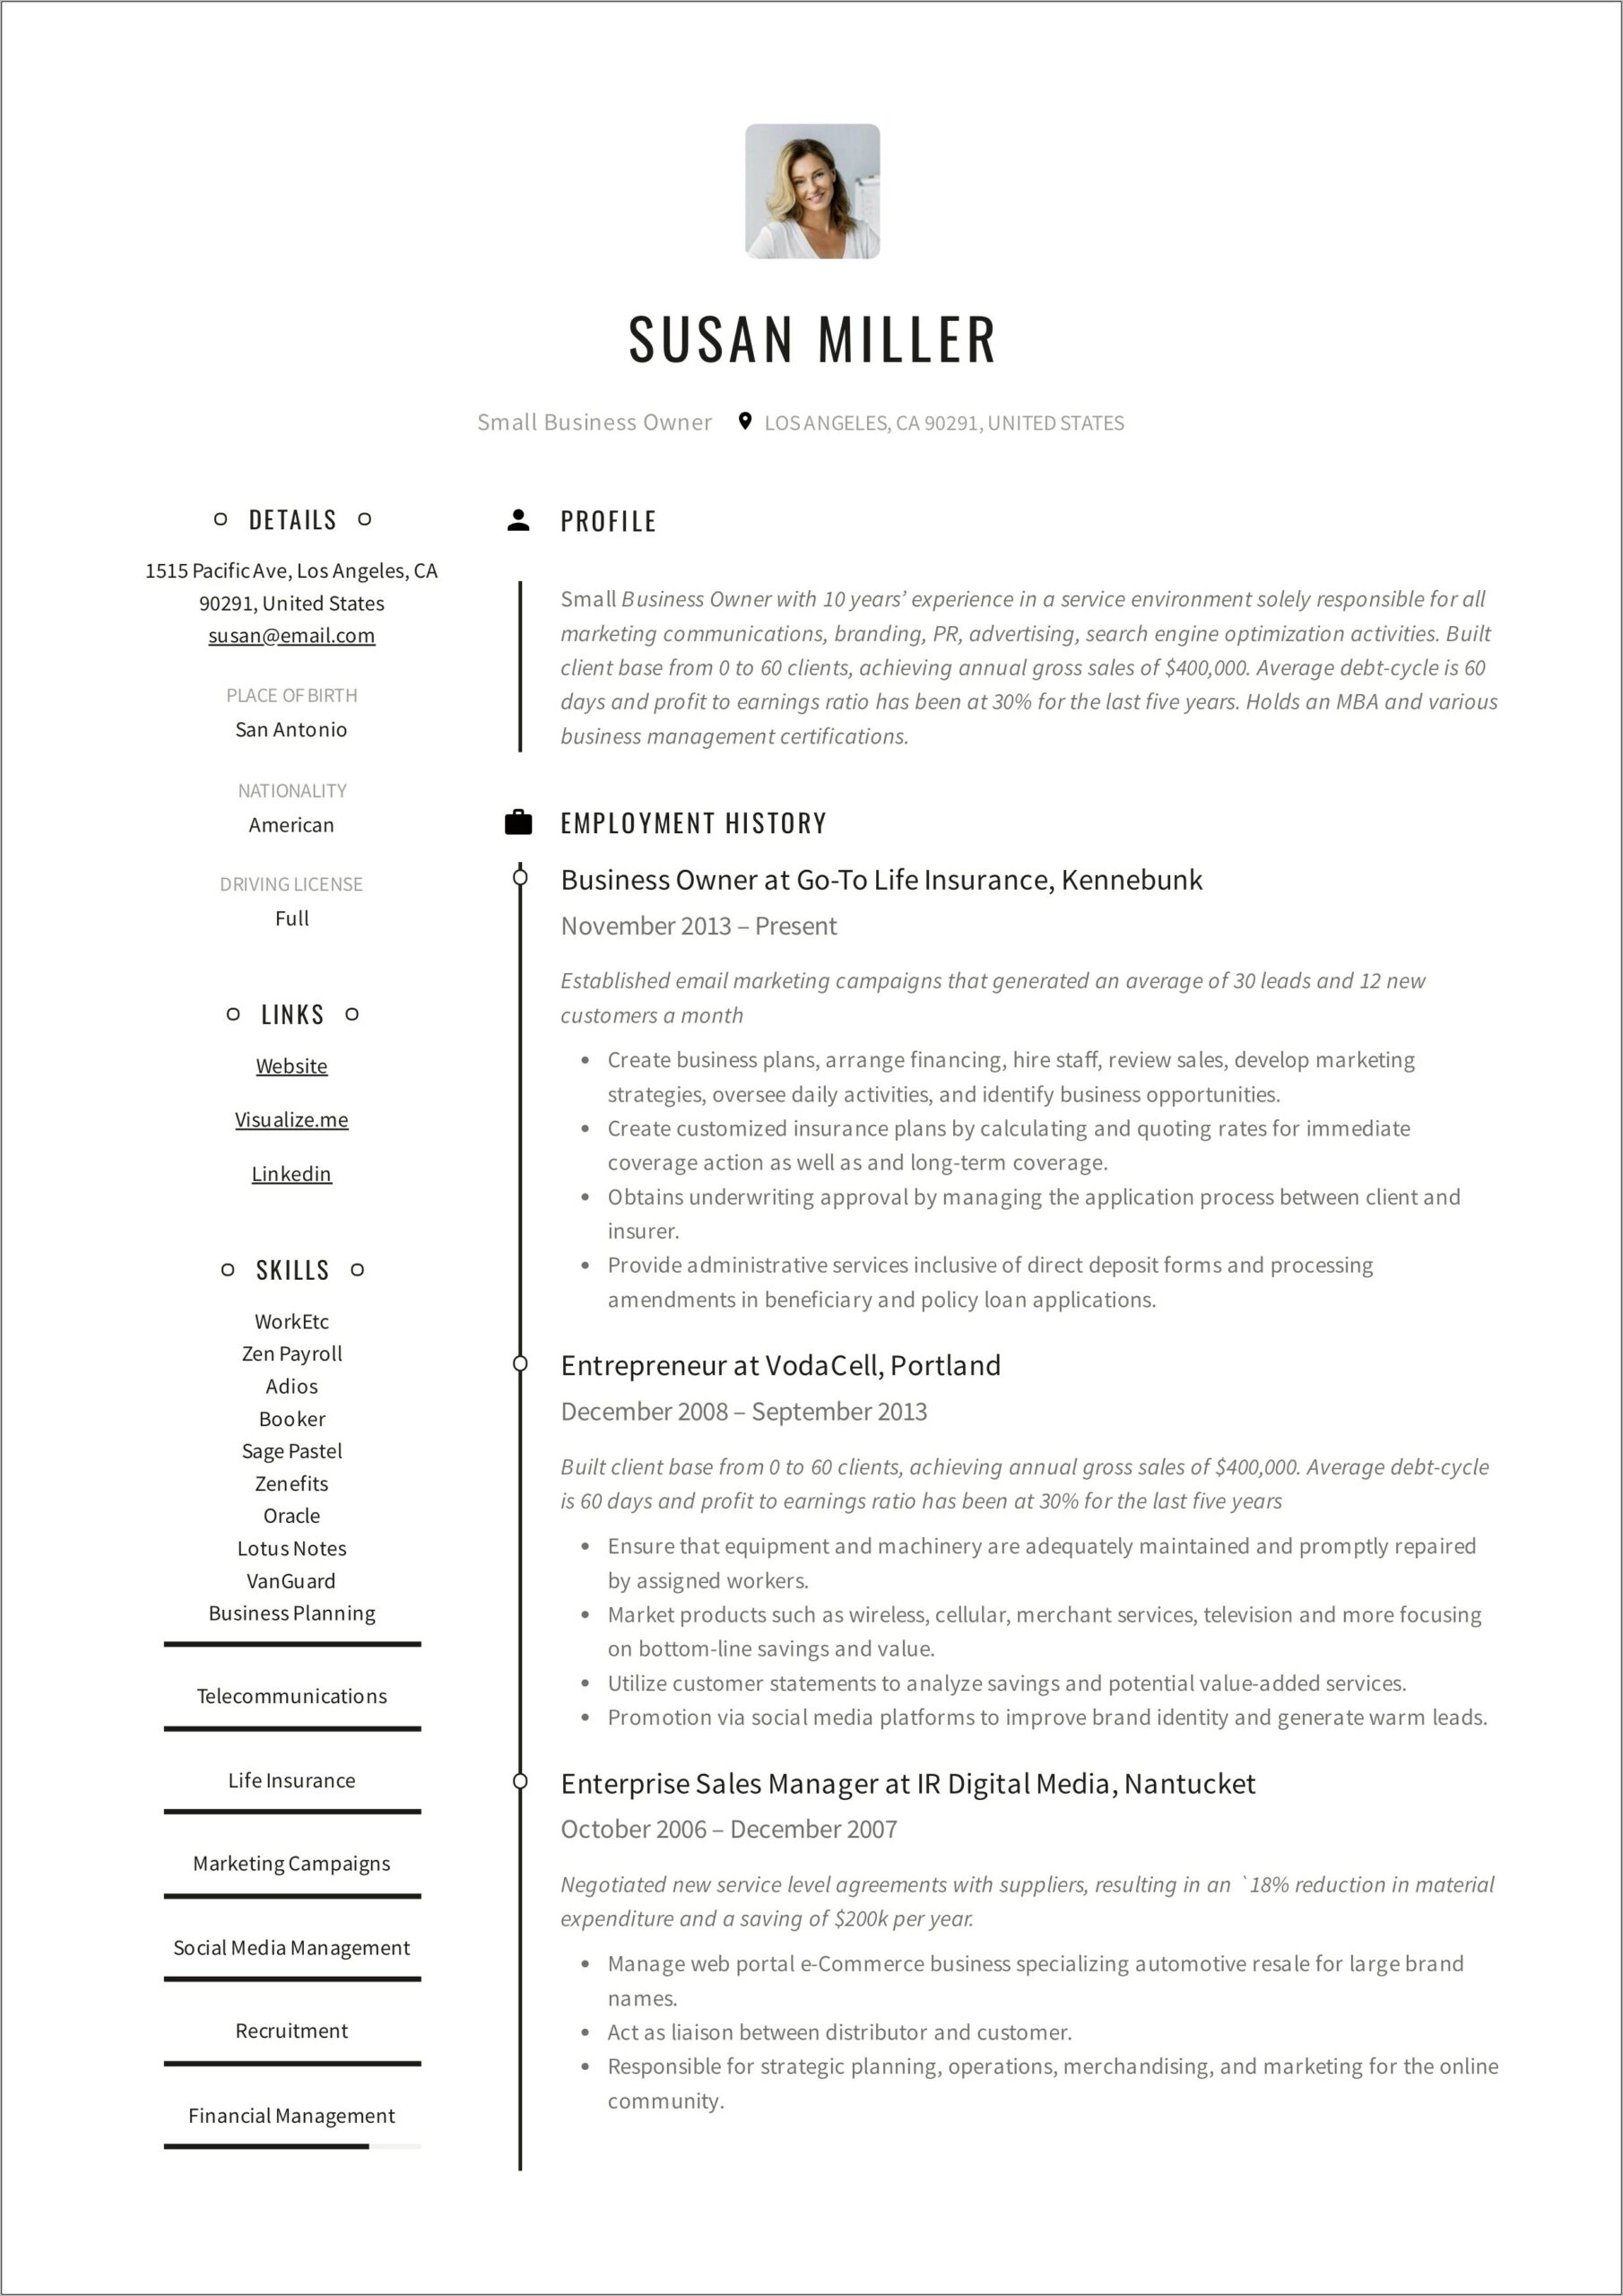 Small Business Owner Resume Examples